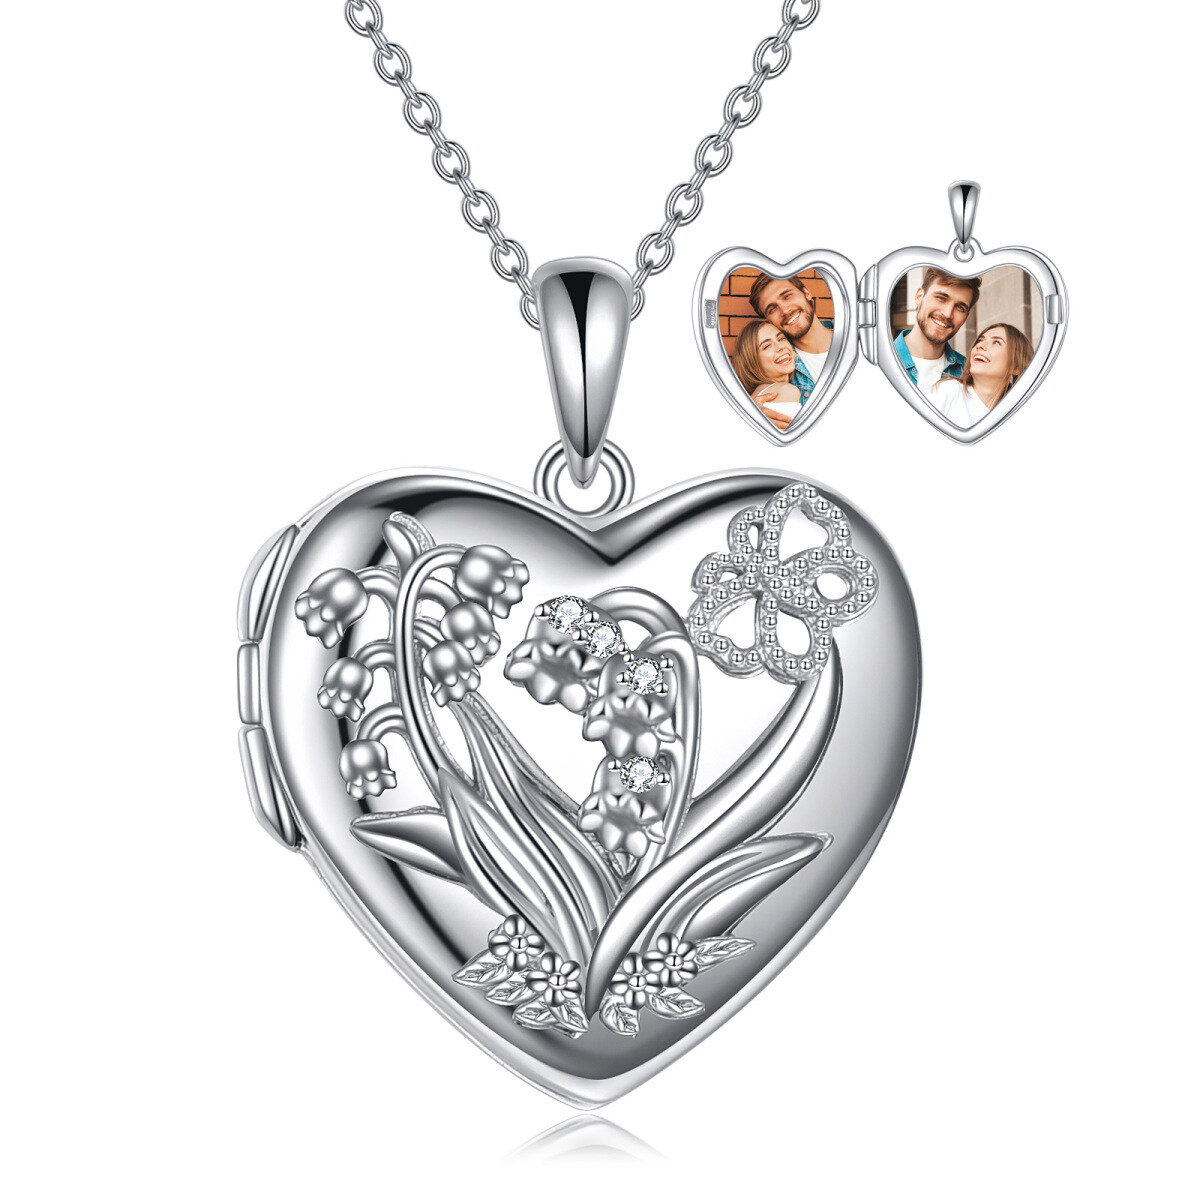 Sterling Silver Lily Of The Valley & Personalized Photo Personalized Photo Locket Necklace-1